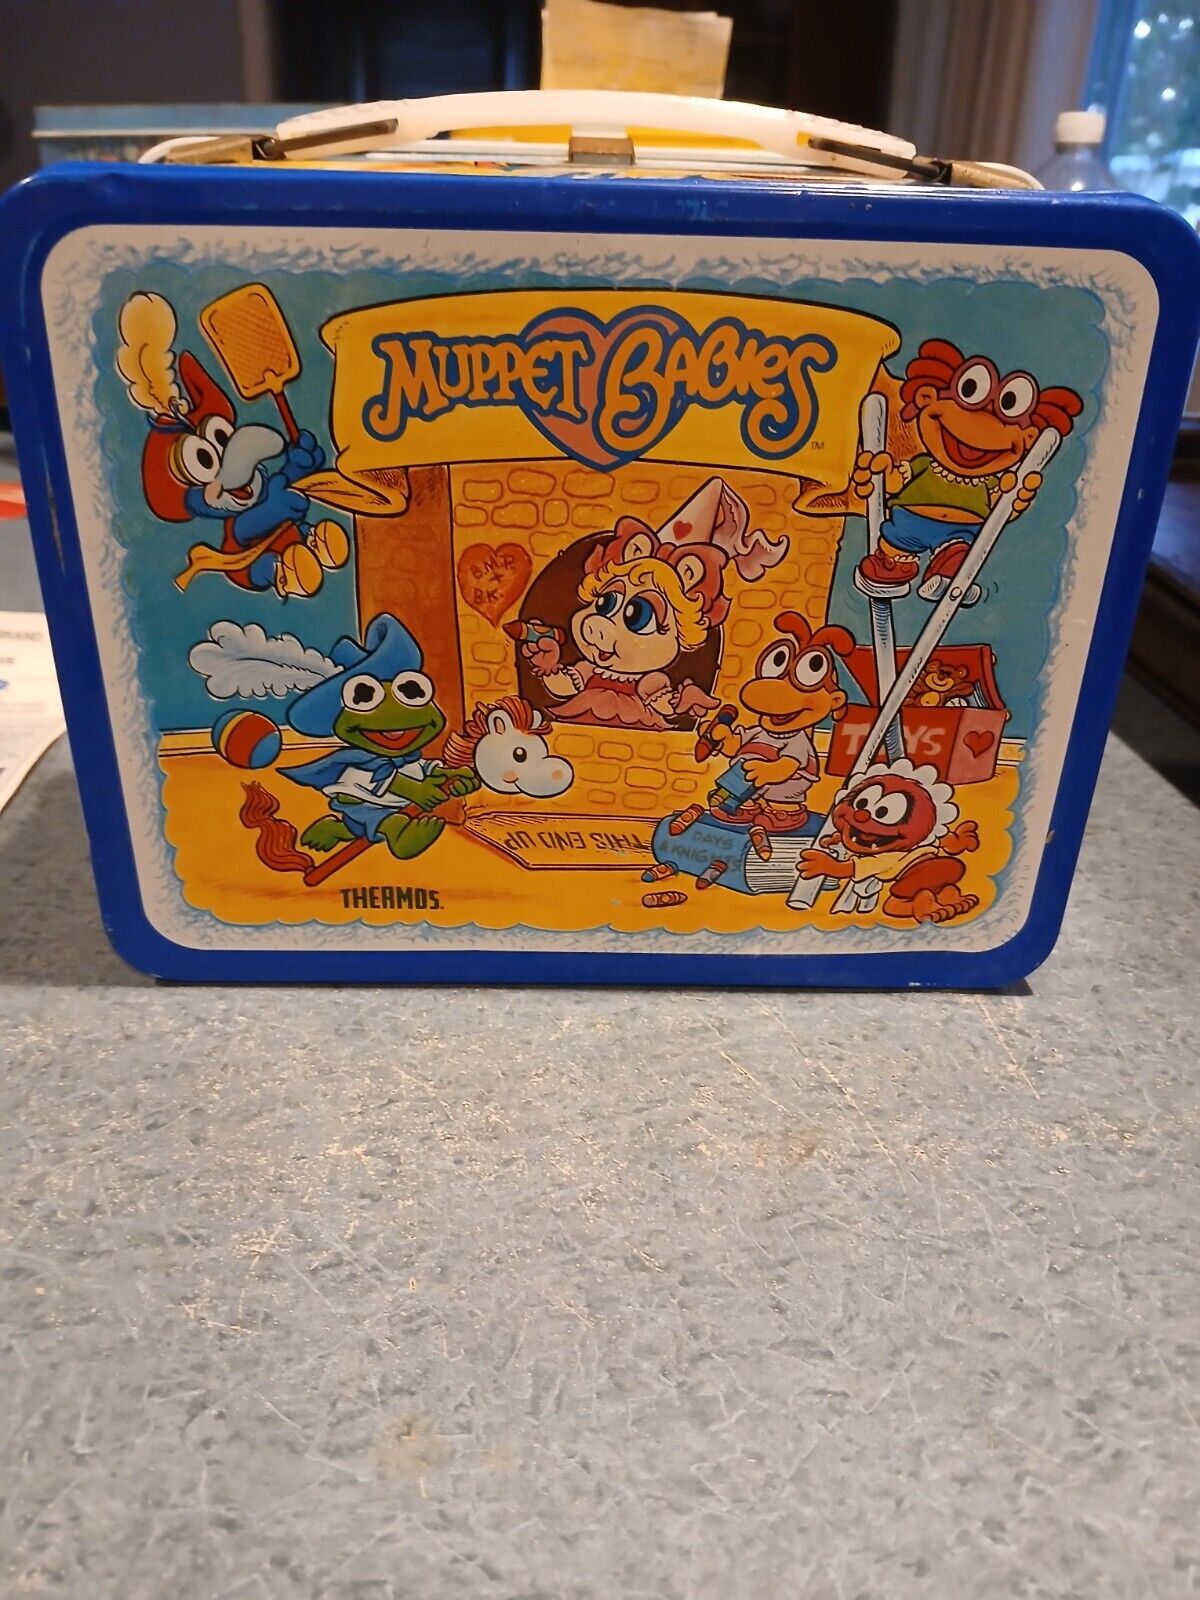 Vintage 1985 Jim Henson's Muppet Babies Metal Lunchbox and Thermos